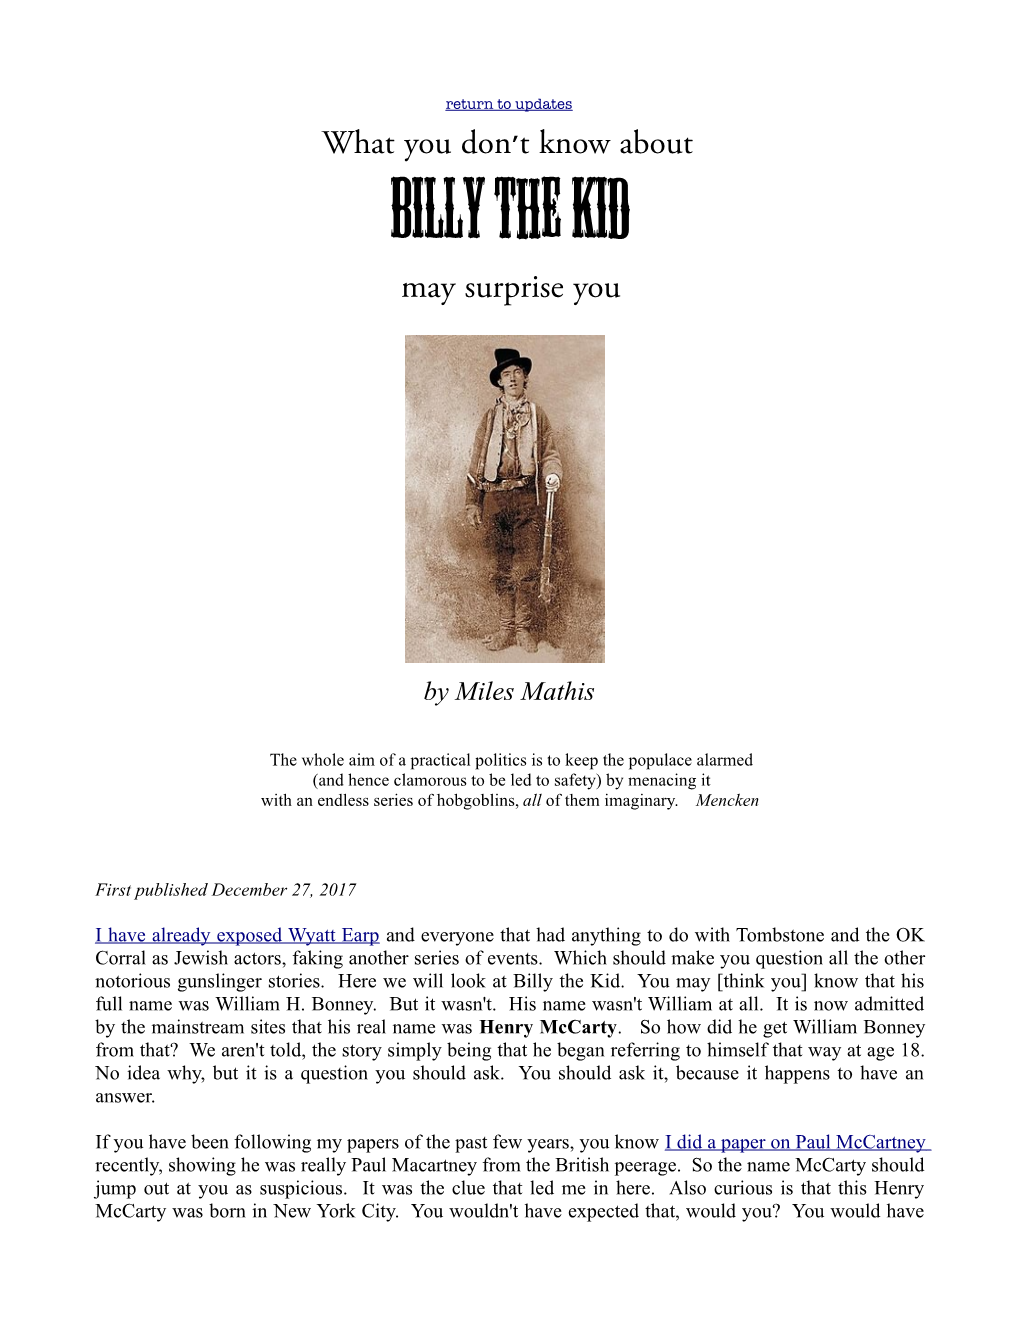 My Paper on Billy The